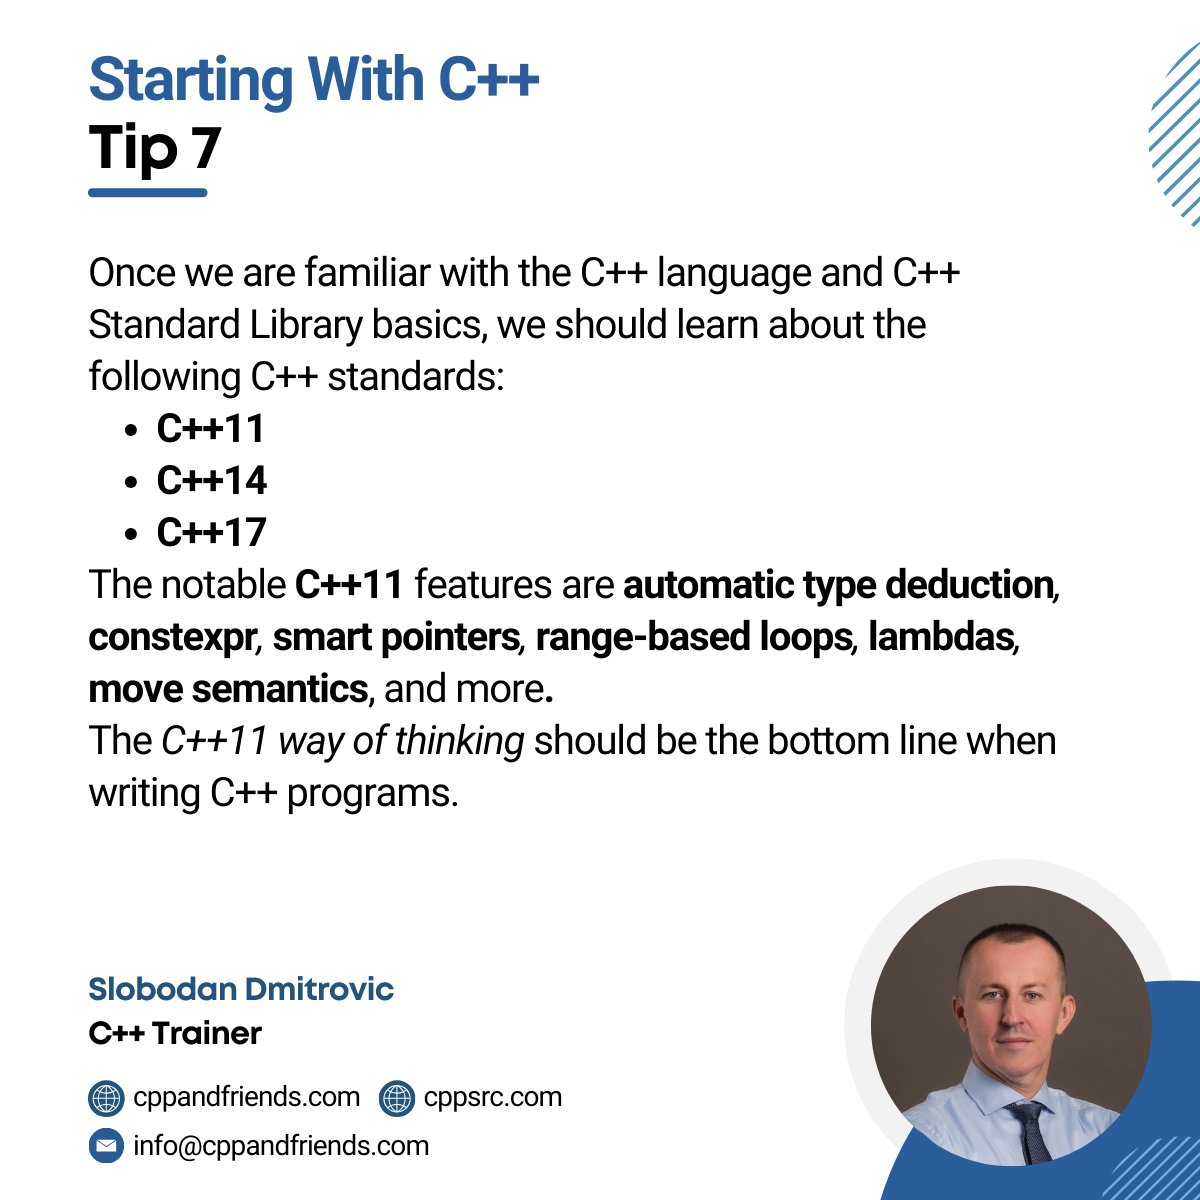 In the beginning, we should learn about the following C++ standards:
· C++11
· C++14
· C++17
Some of the C++11 features are automatic type deduction, constexpr, smart pointers, range-based loops, lambdas, move semantics and more.
#cplusplus